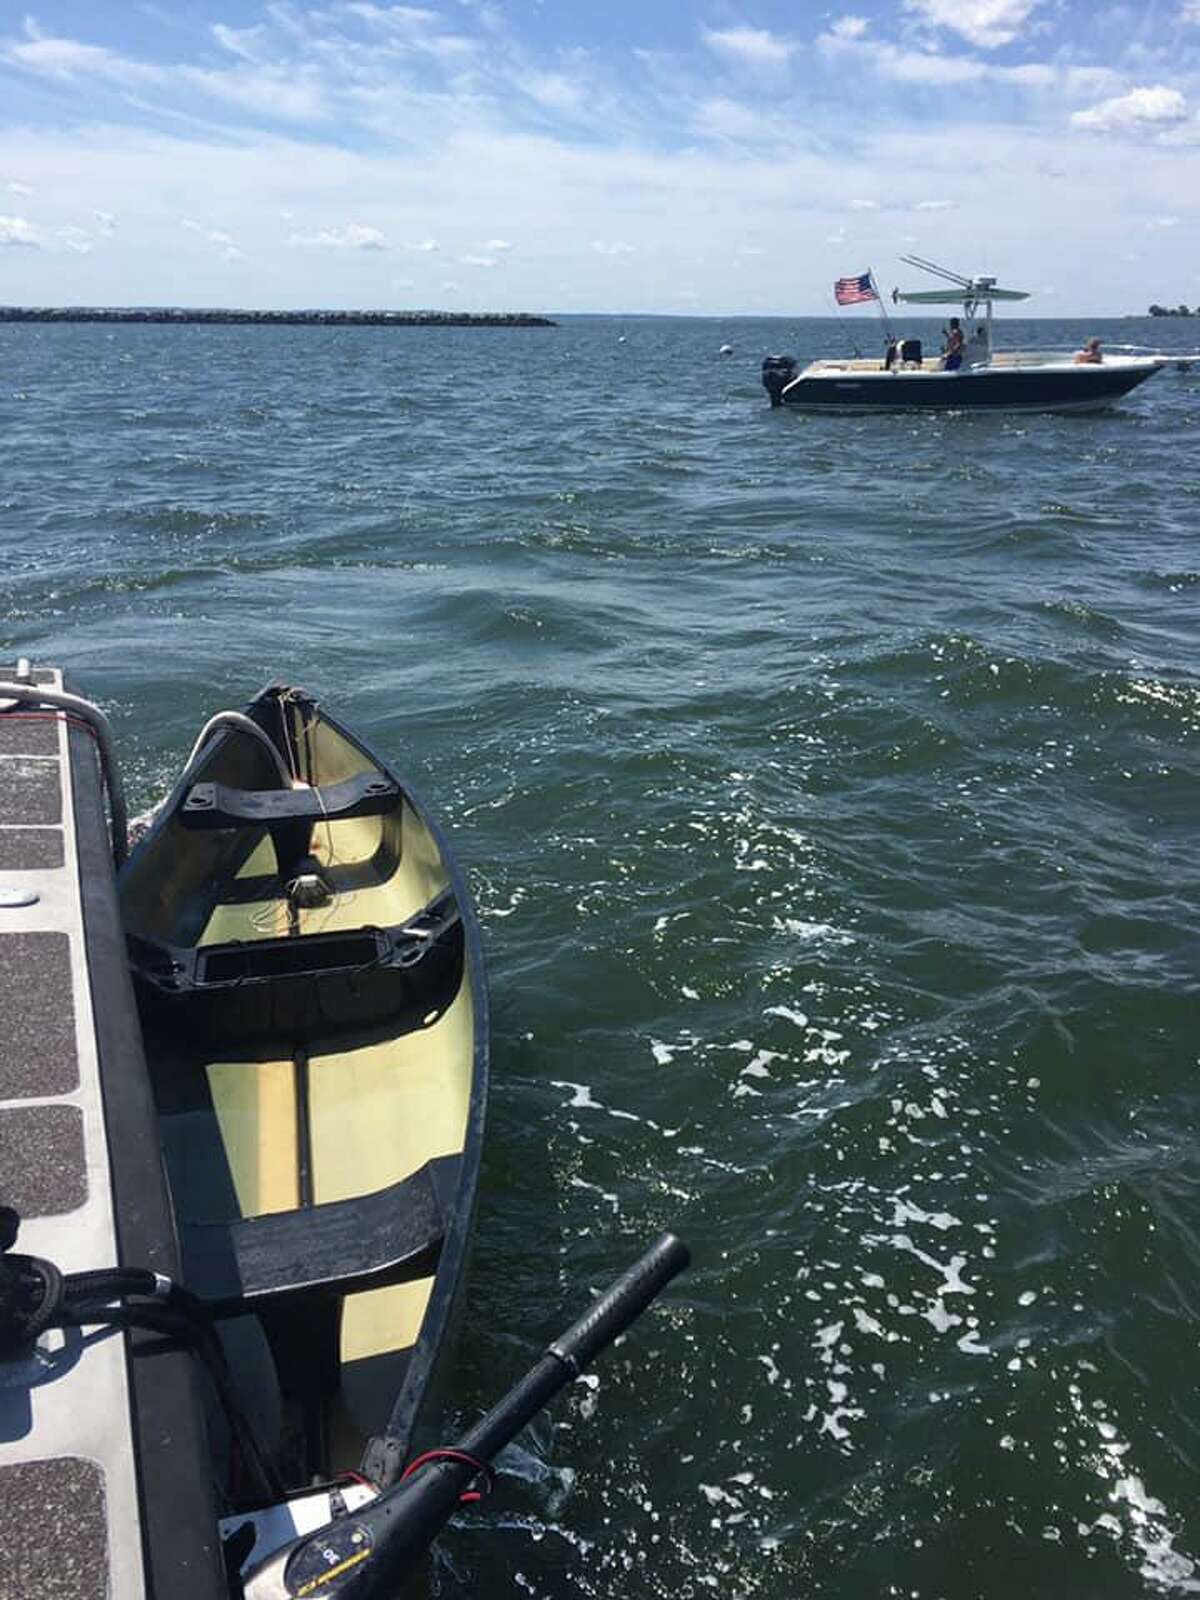 The U.S. Coast Guard Sector Long Island Sound is looking for the owner of a 10-foot canoe that was found capsized and anchored in the waters off Stamford on Saturday.